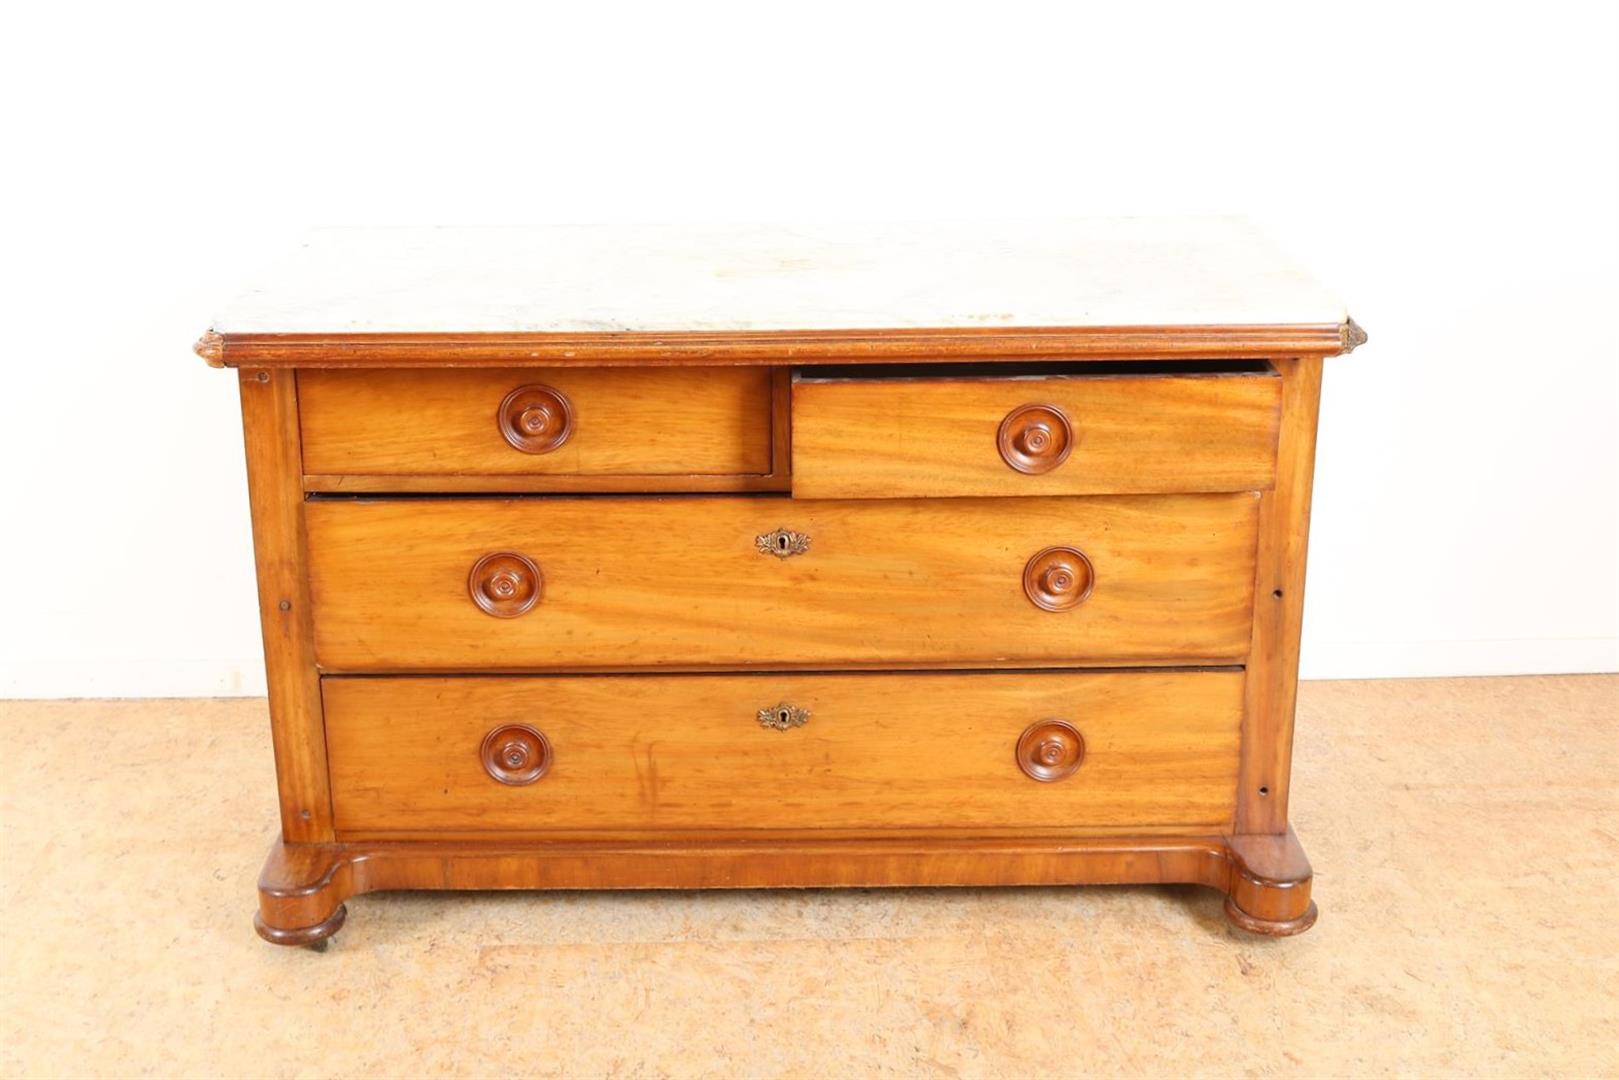 Mahogany laundry chest with marble top on 4 drawers with wooden pulls, 19th century, 77 x 125 x 76